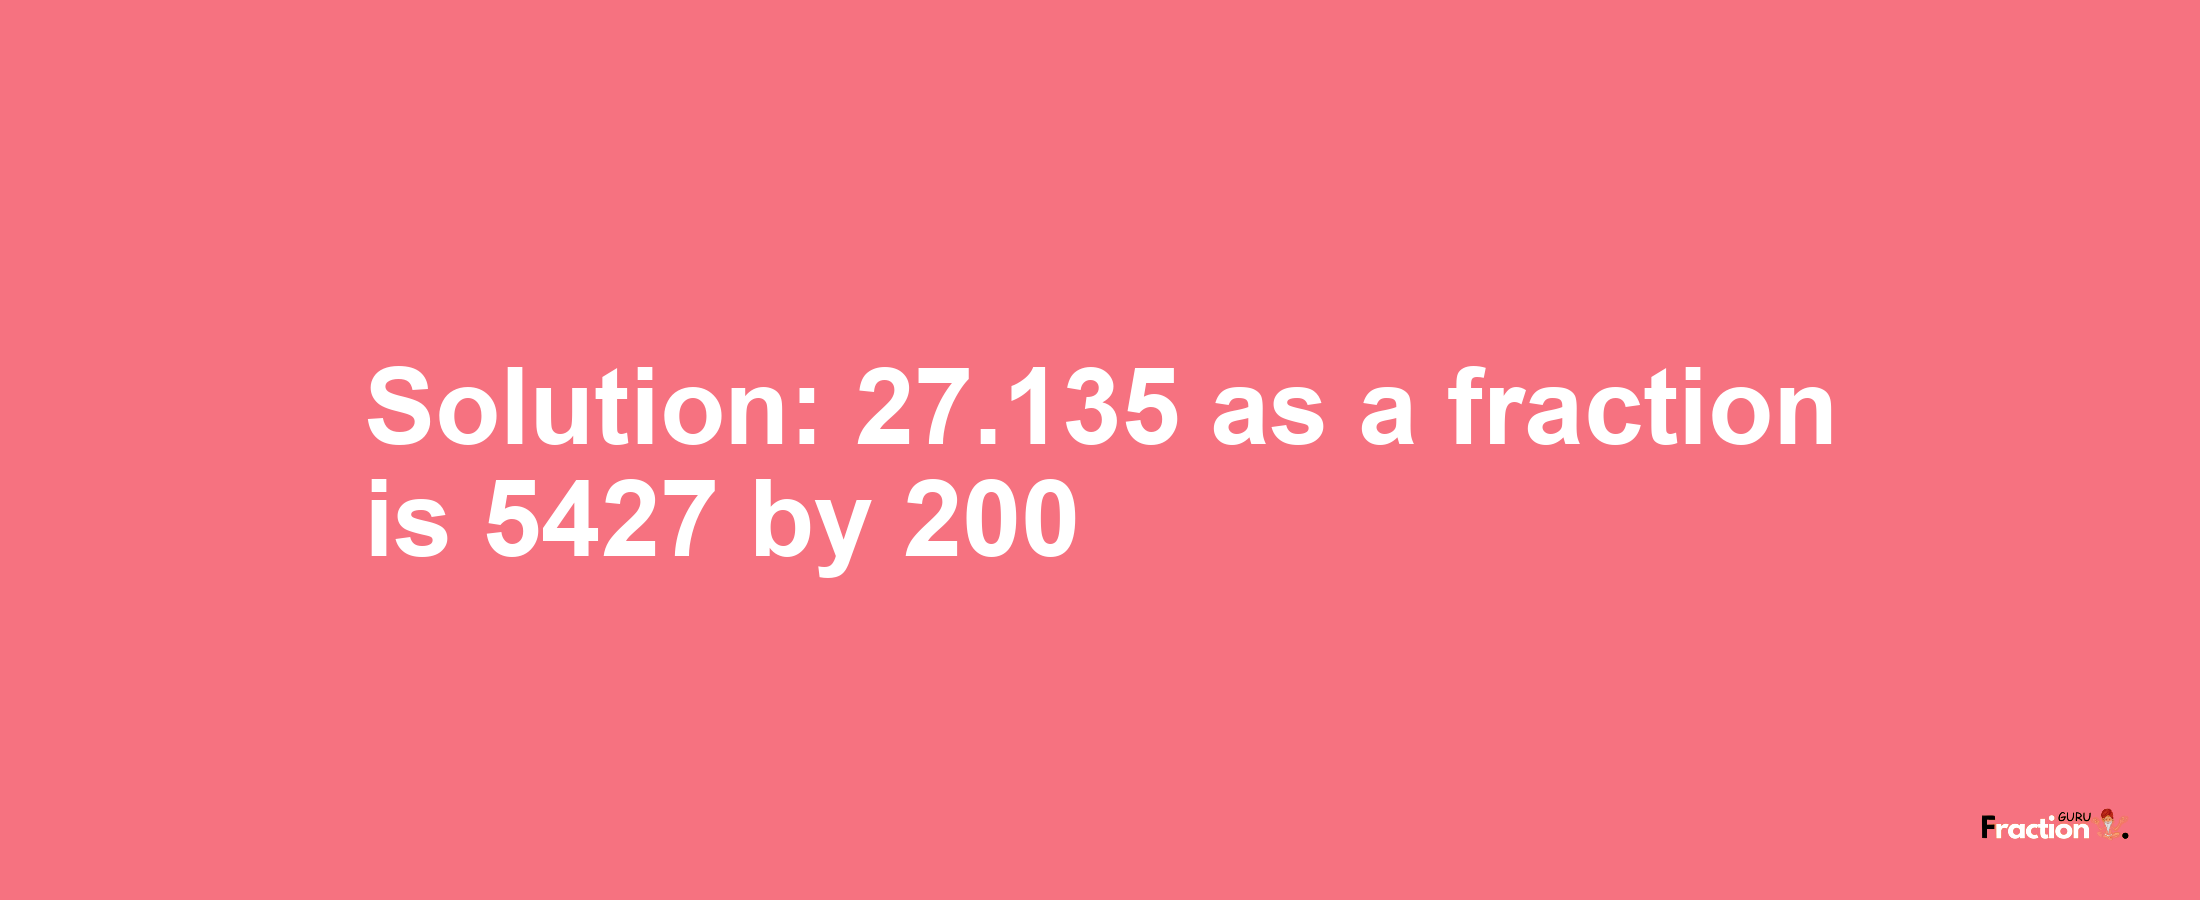 Solution:27.135 as a fraction is 5427/200